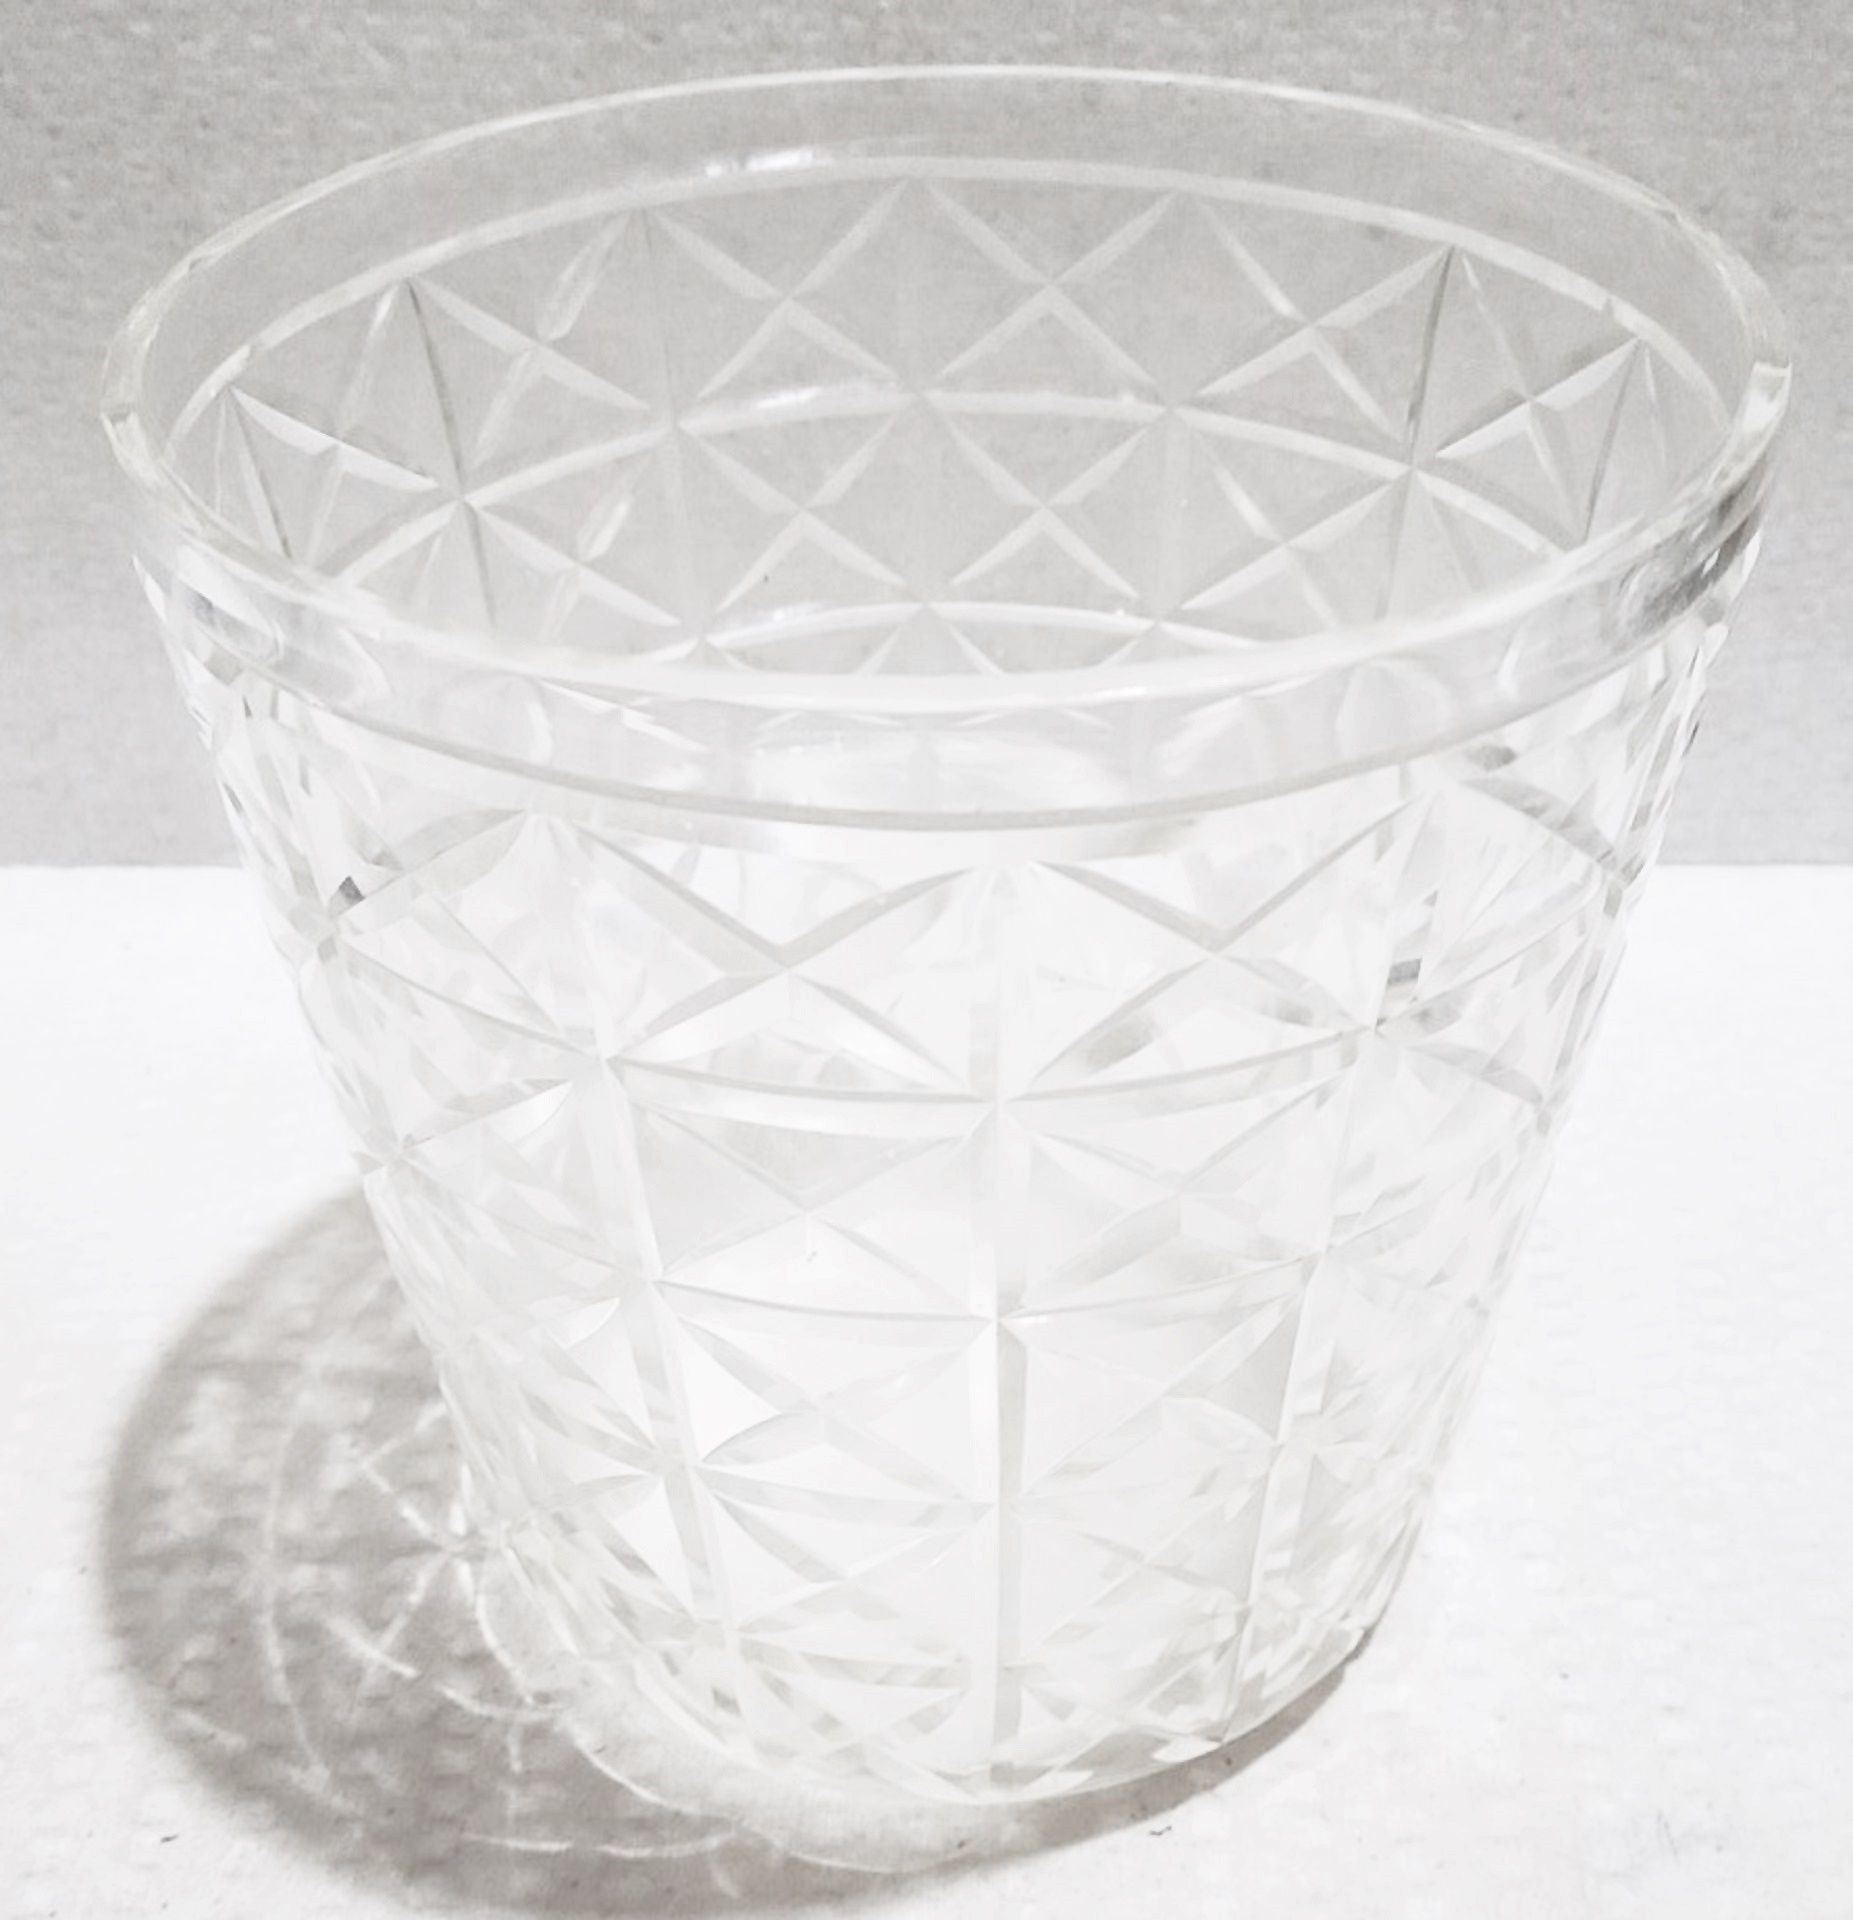 1 x EICHHOLTZ 'Chablis' Luxury Hand-blown Clear Grooved Glass Wine Cooler - Original Price £468.00 - Image 3 of 3